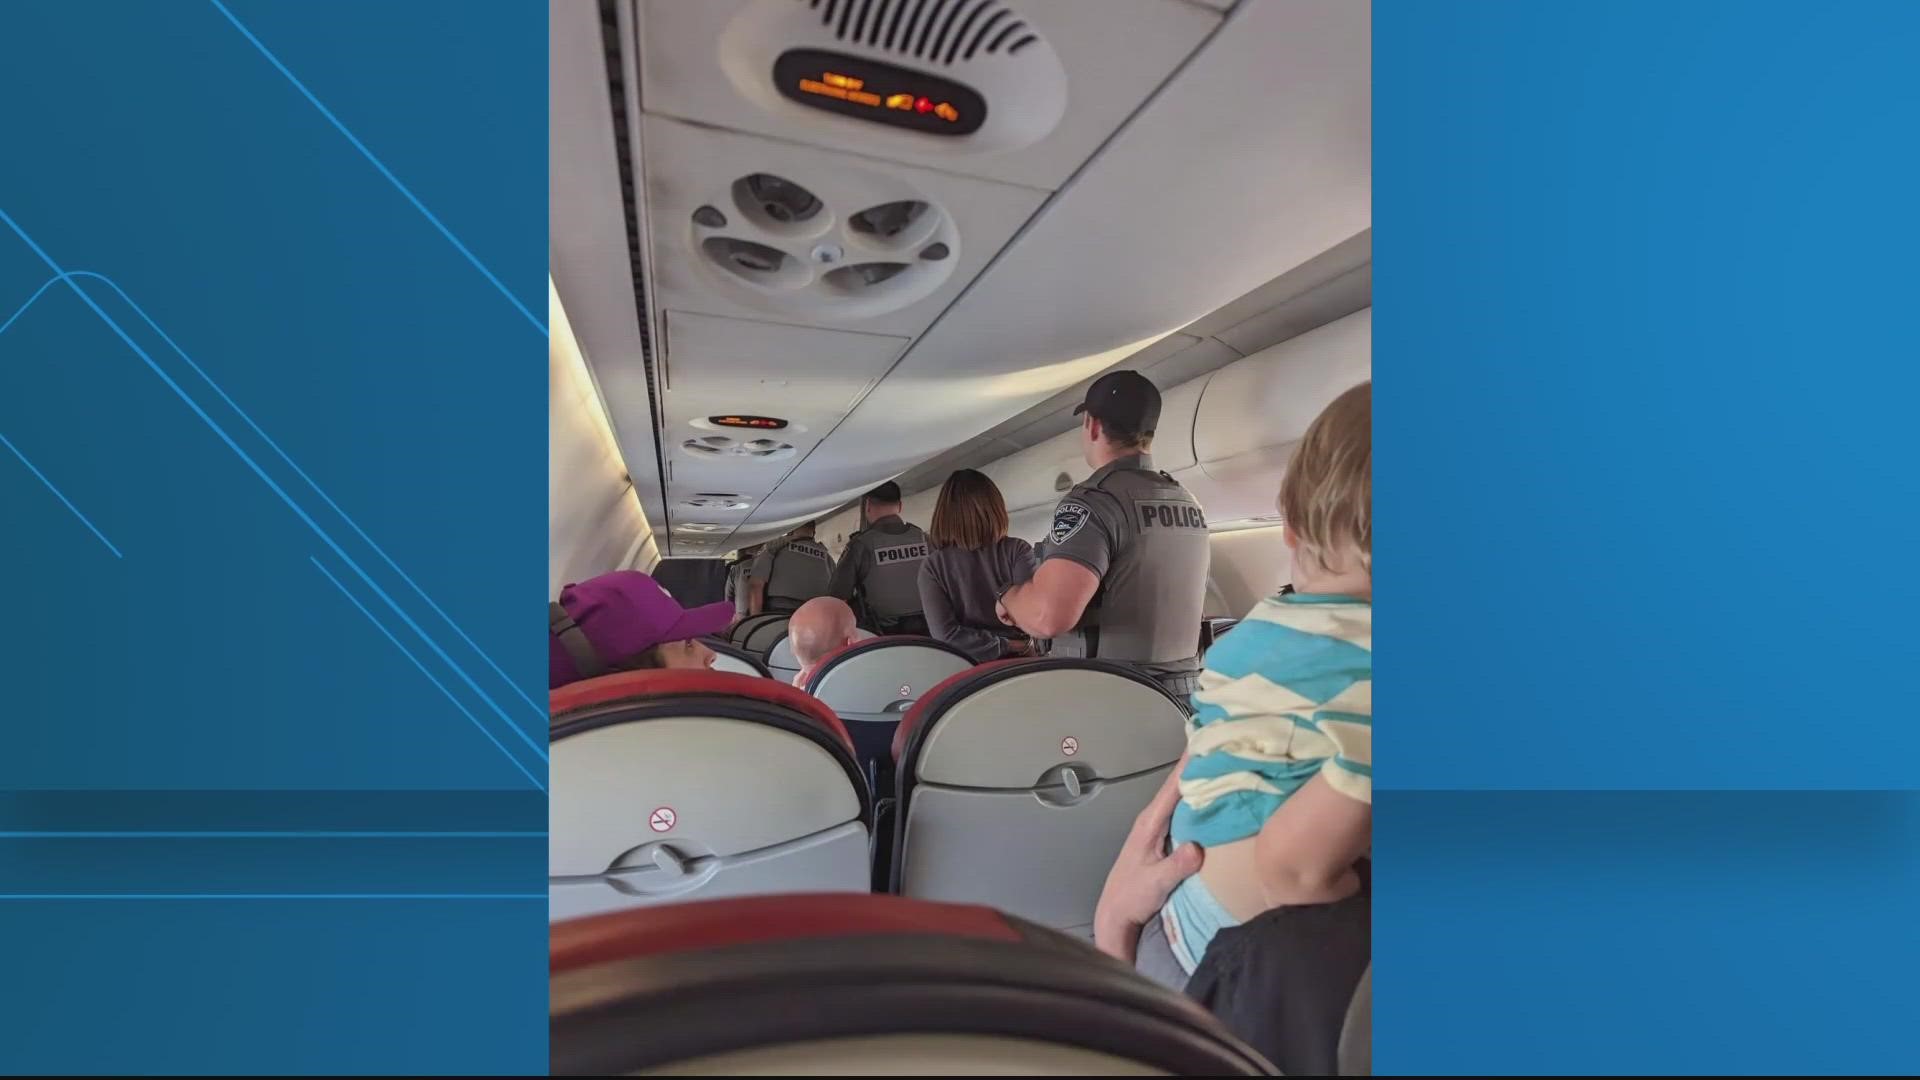 Passengers on a flight to Washington D.C. were forced to make a detour after the flight was diverted to North Carolina due to an unruly passenger.